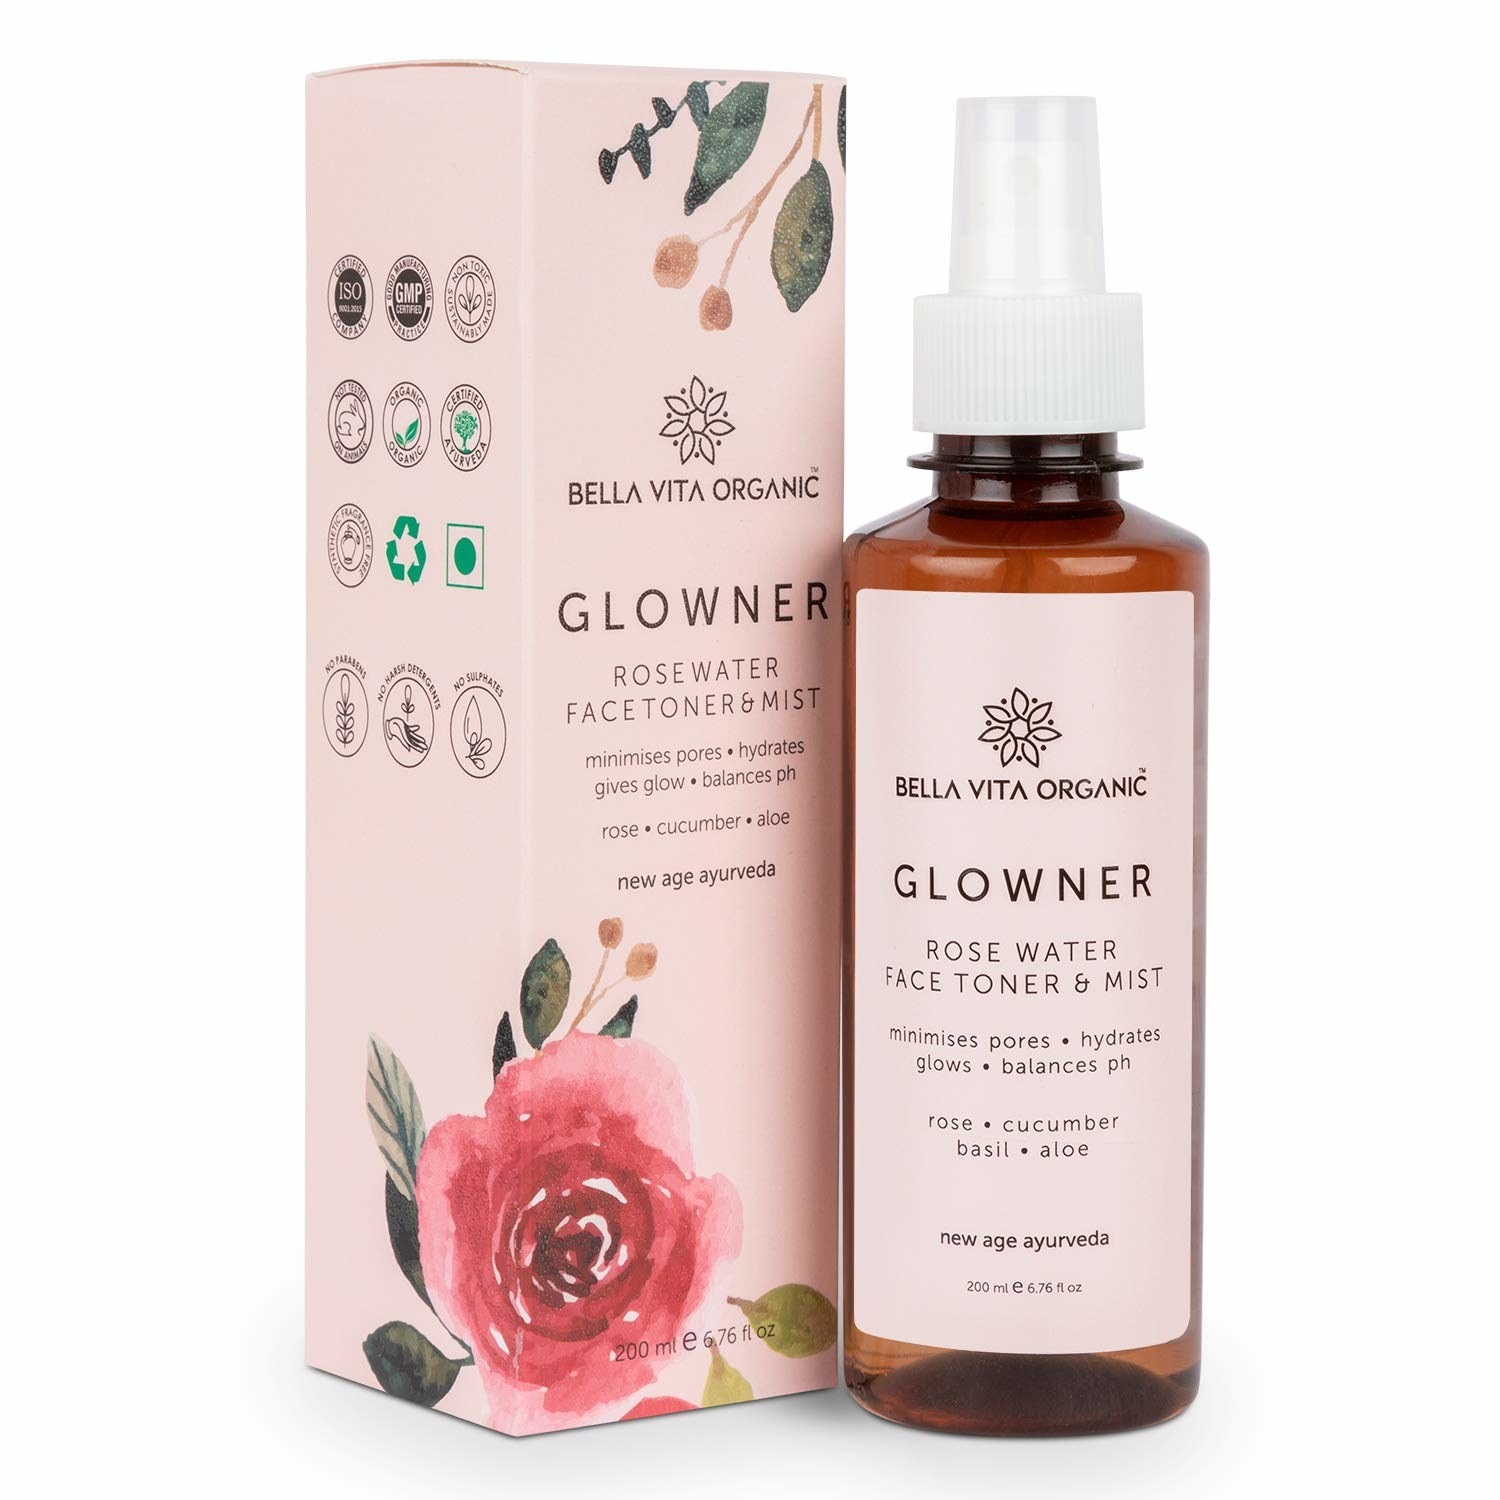 A bottle of Glowner rose water face toner and mist